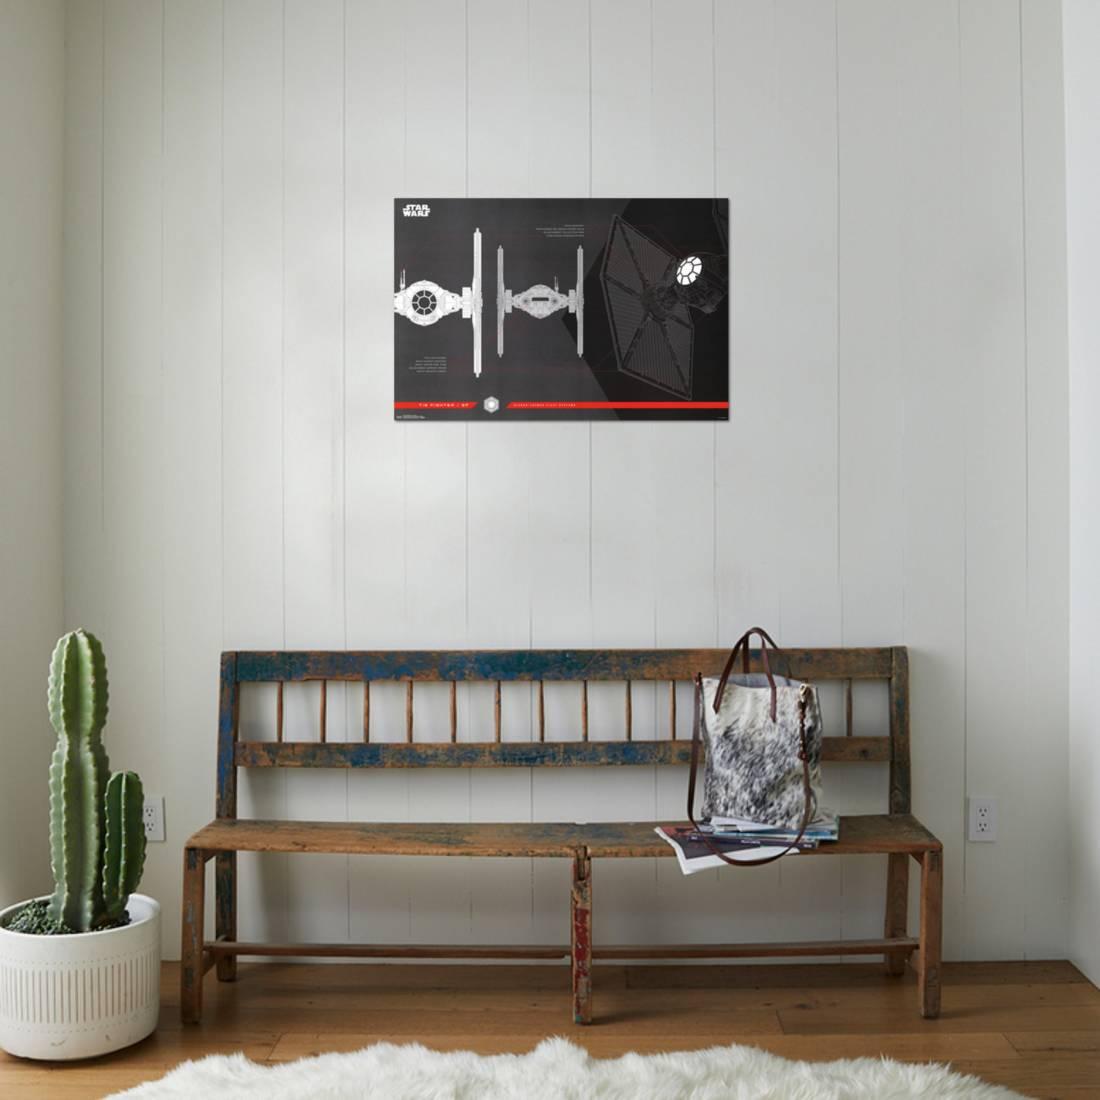 TLJ FO Tie Fighter Collector's Edition Poster 1